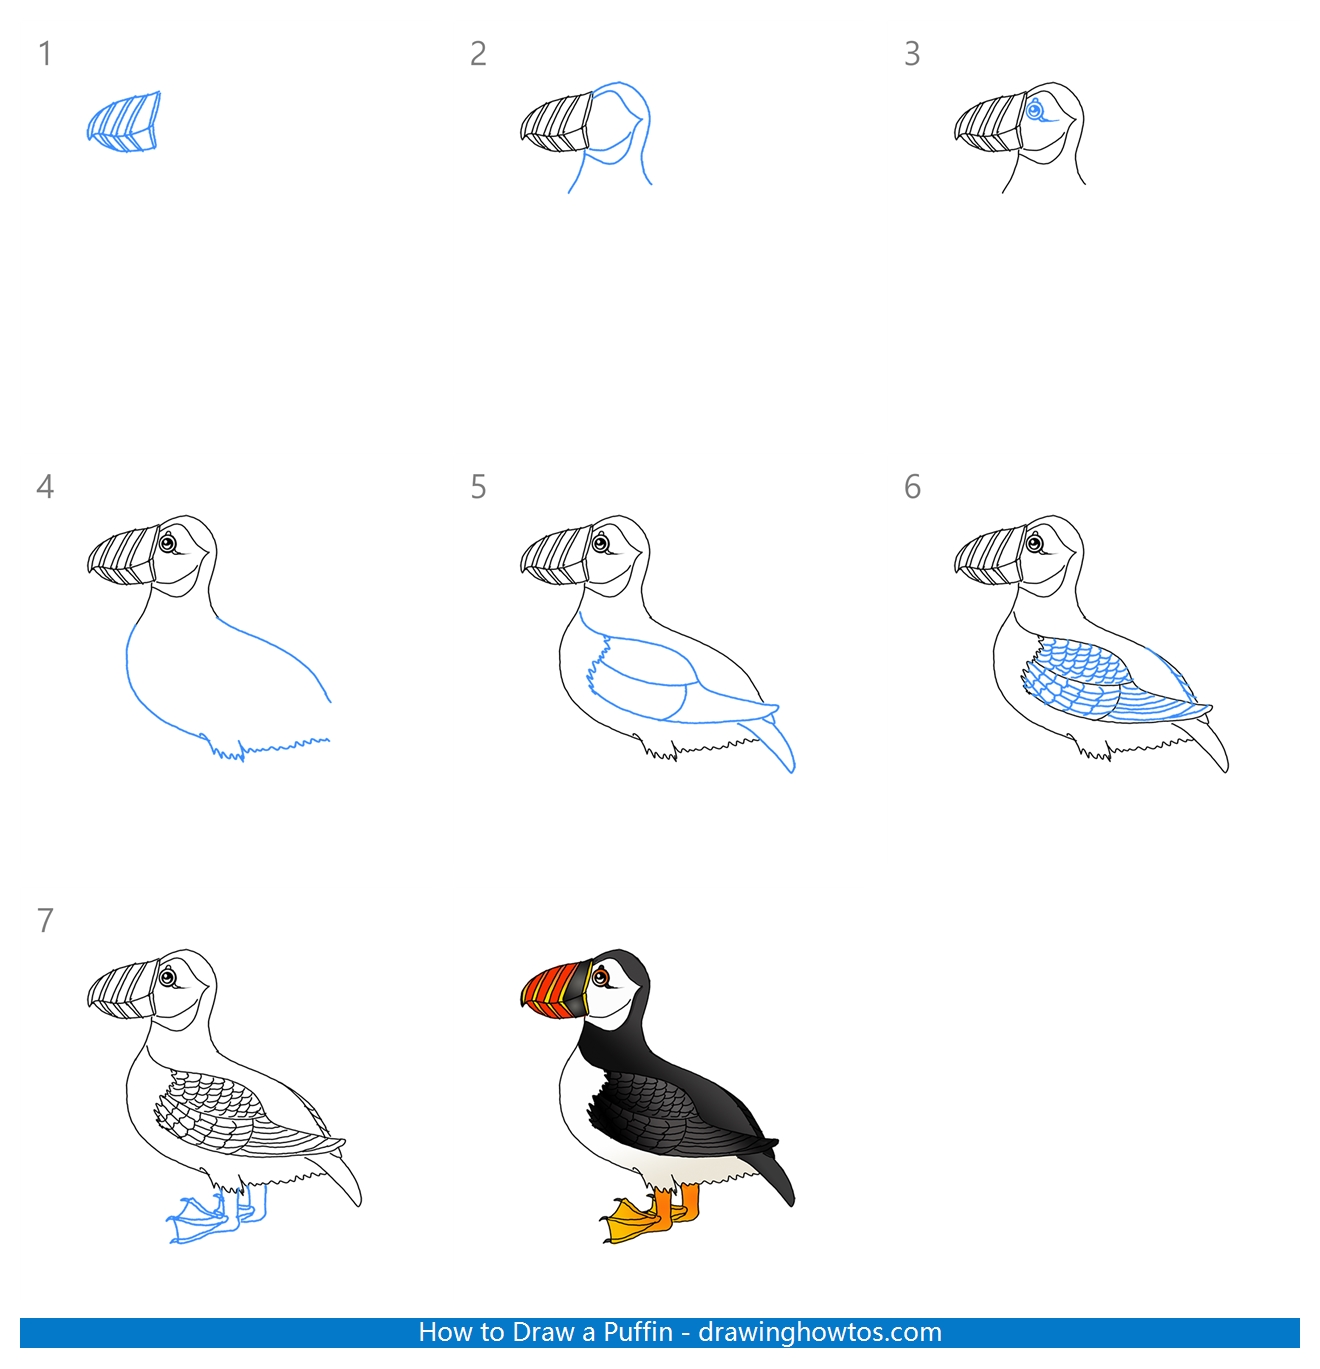 How to Draw a Puffin Step by Step